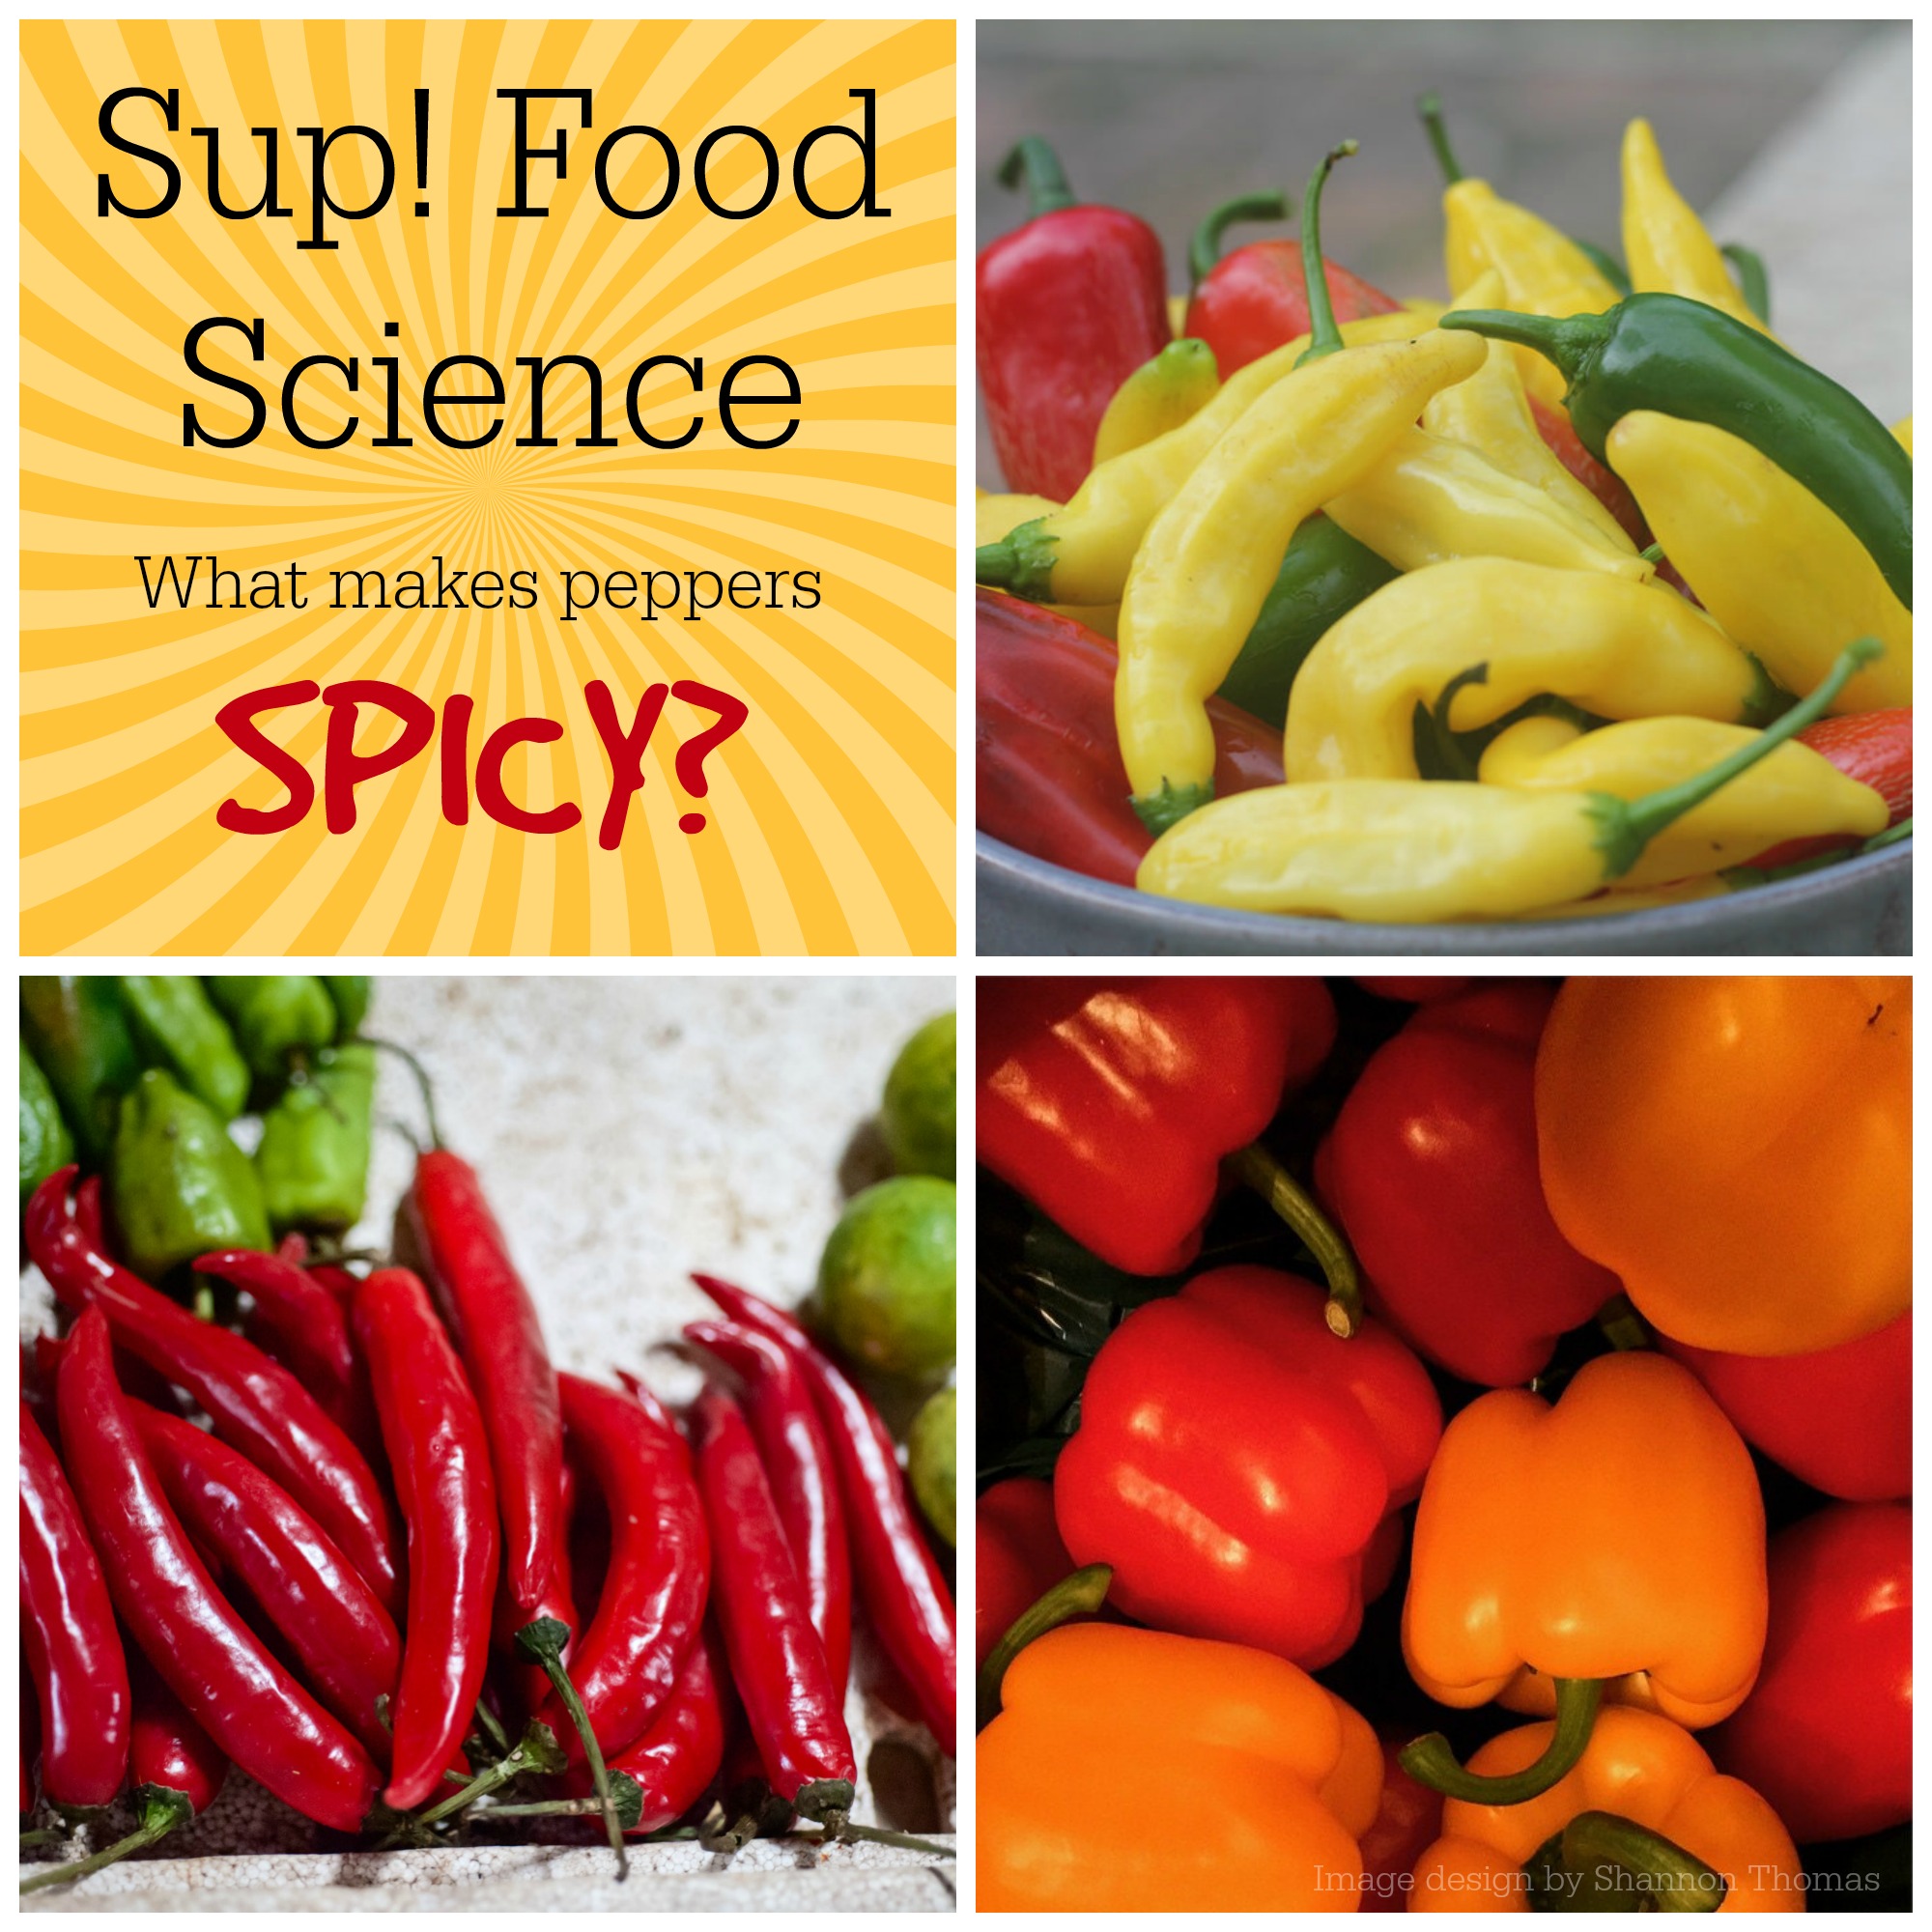 Food Science: What Makes Peppers Spicy?